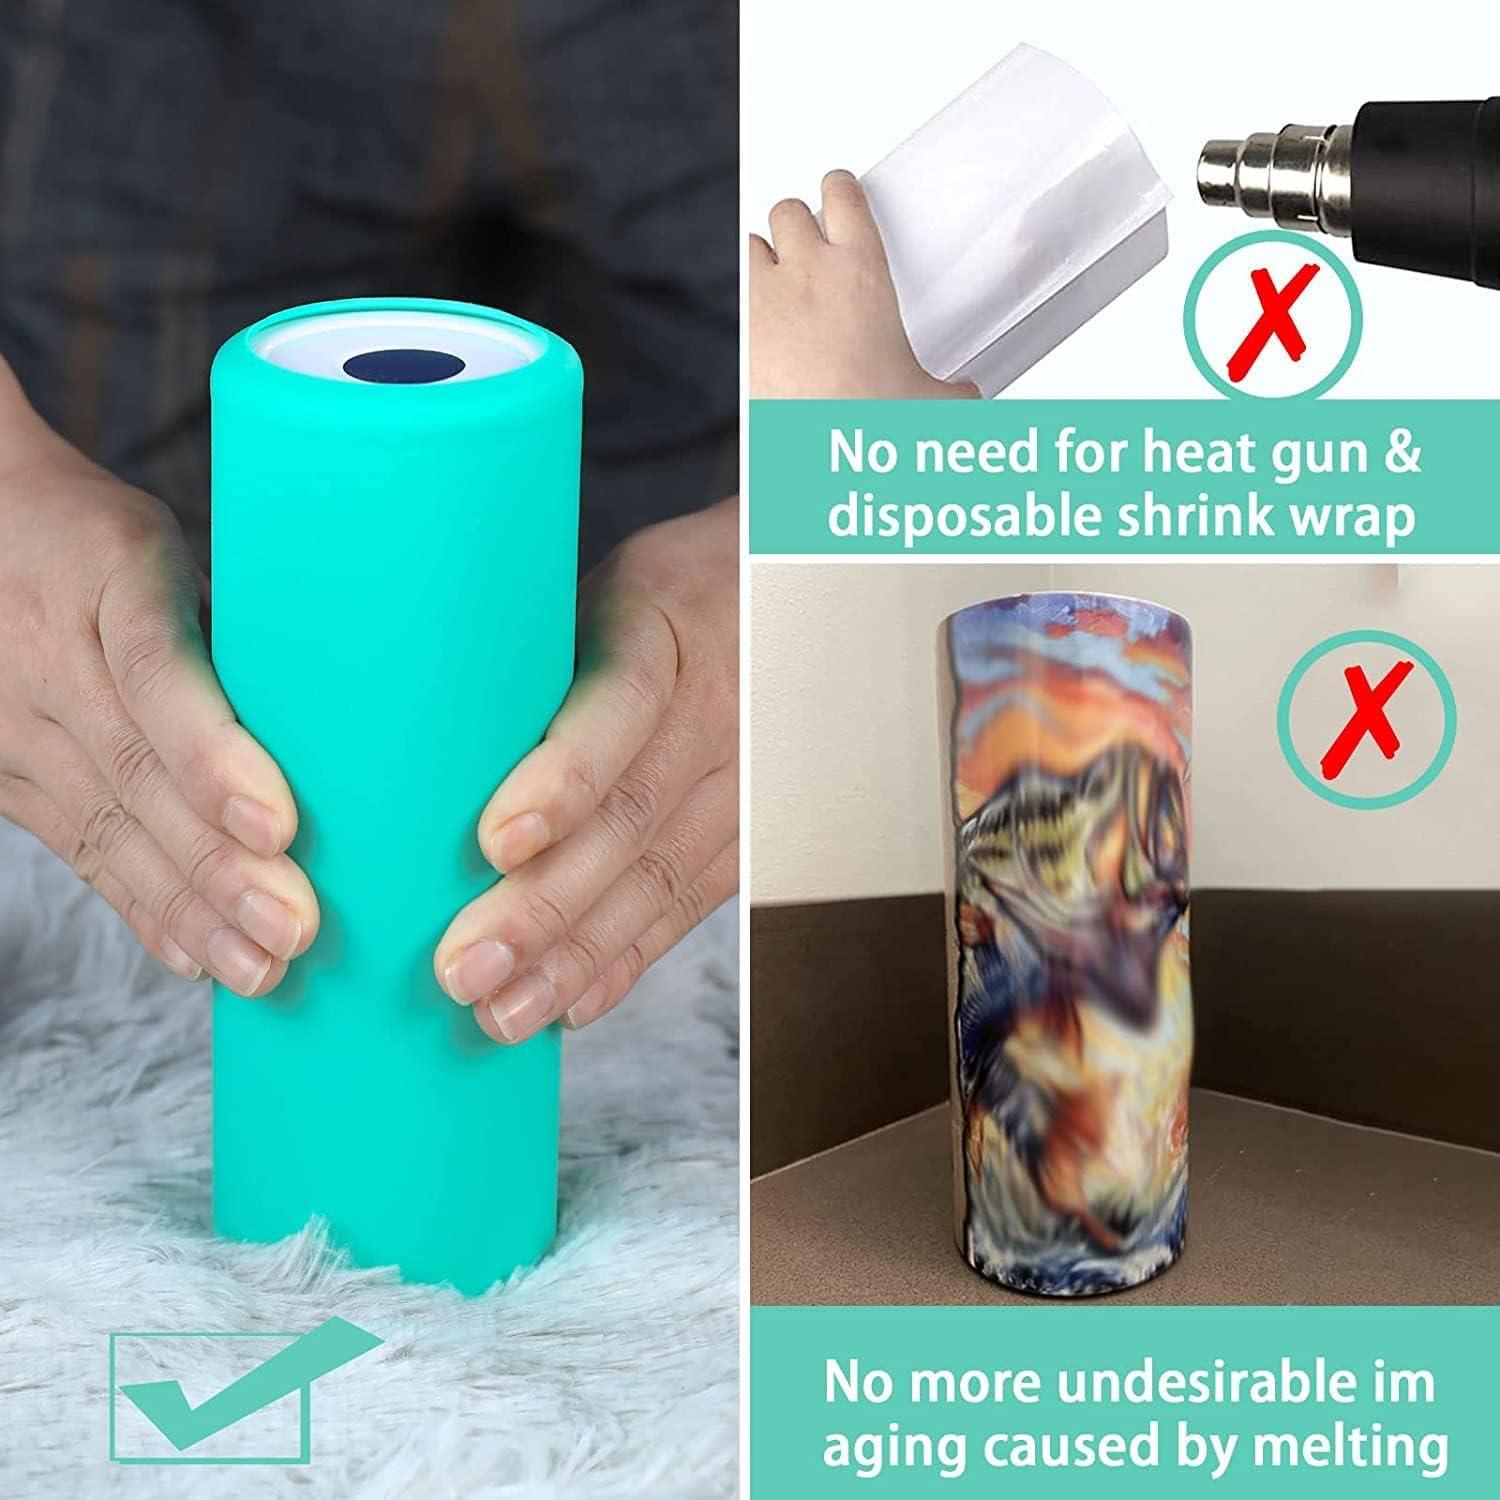 Silicone Bands For Sublimation Tumbler,2 Sizes Tight-Fitting,Prevent  Ghosting Sublimation Paper Holder For 20 Oz Cups